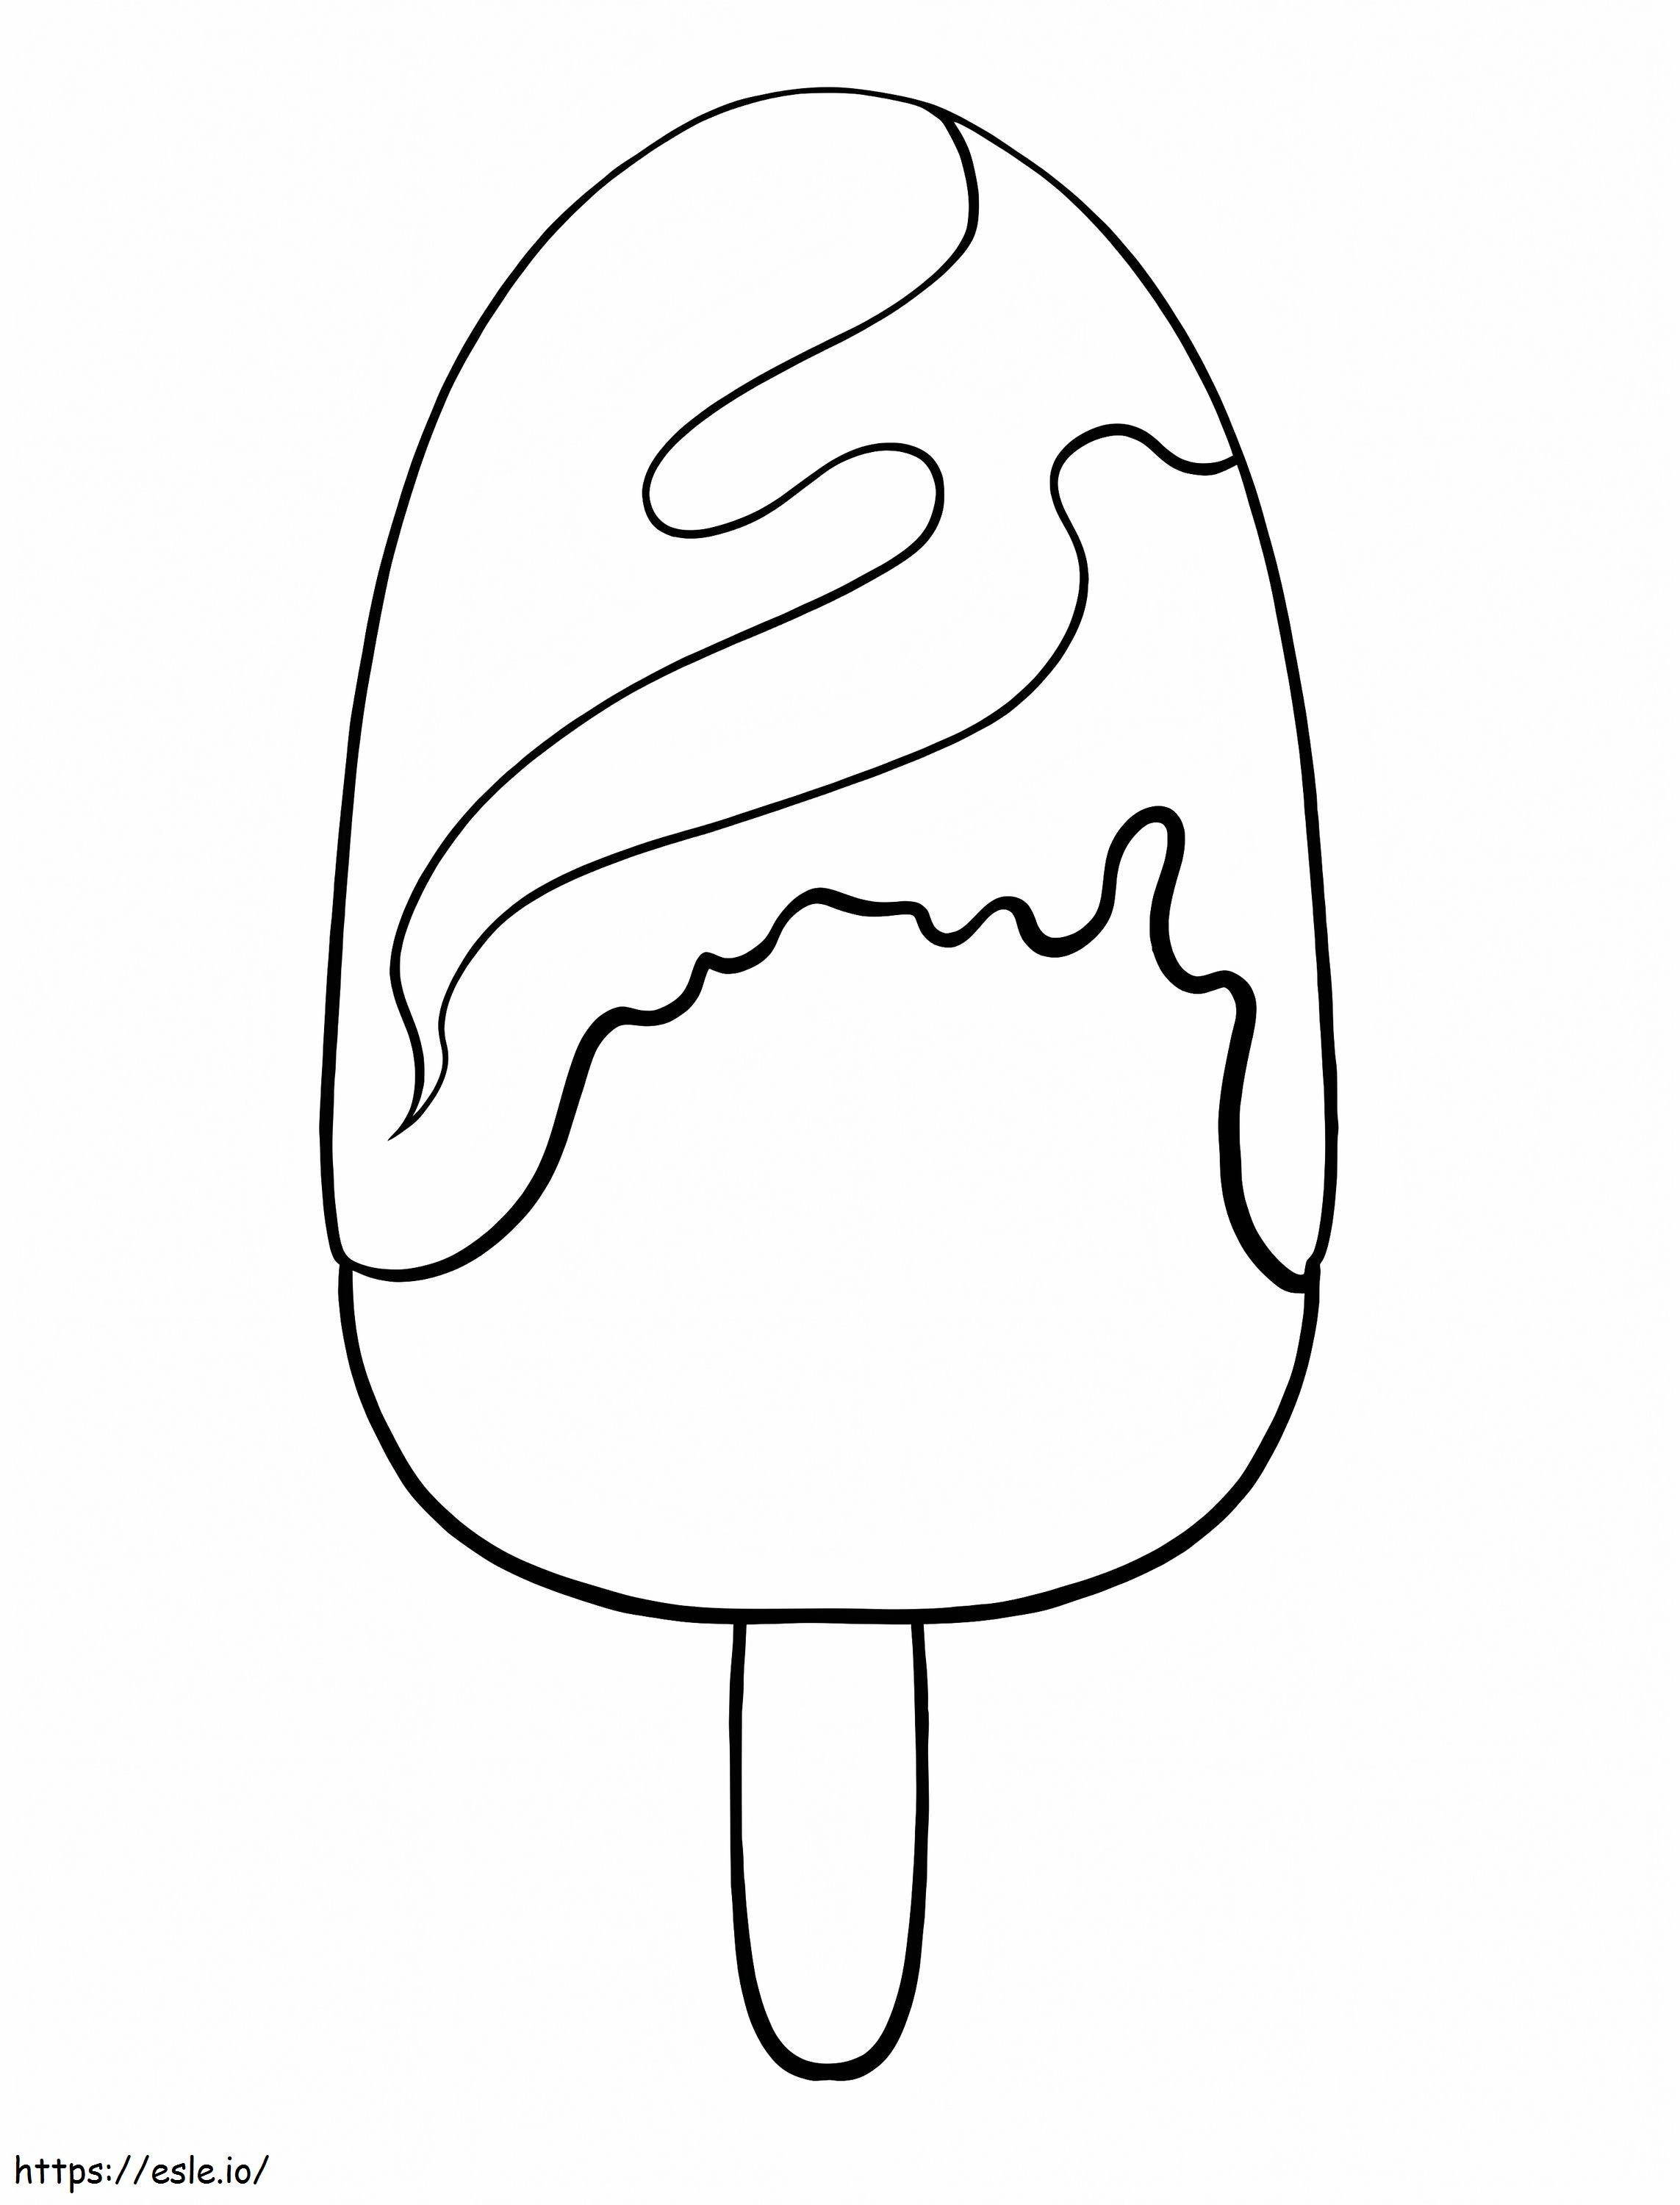 Chocolate Popsicle coloring page